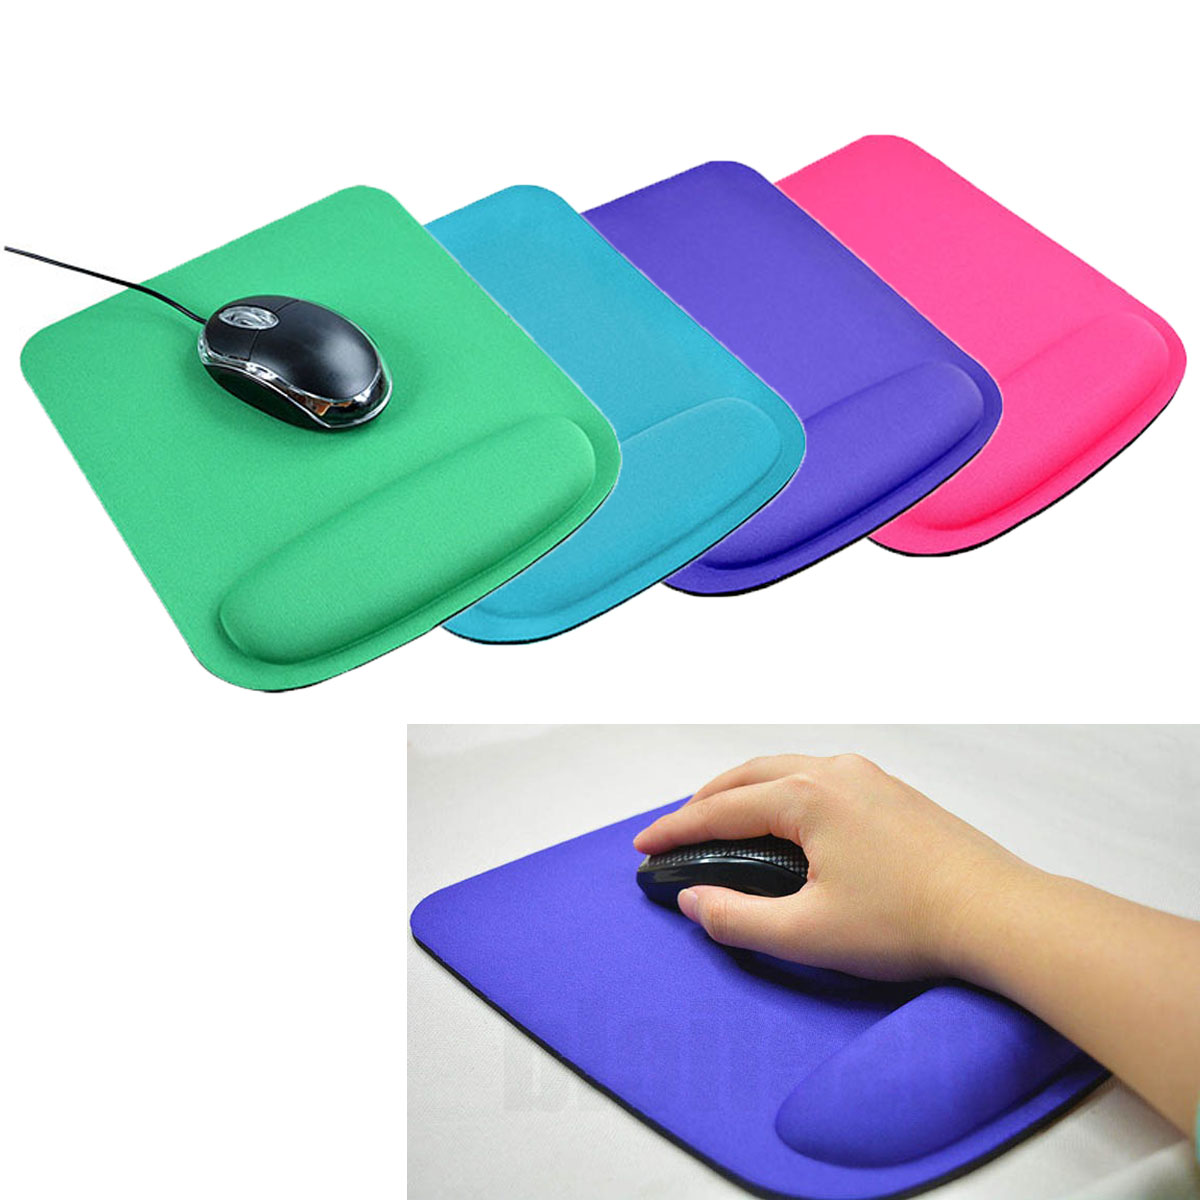 GL-AKL0100 Square Mouse Pad with Wrist Protect